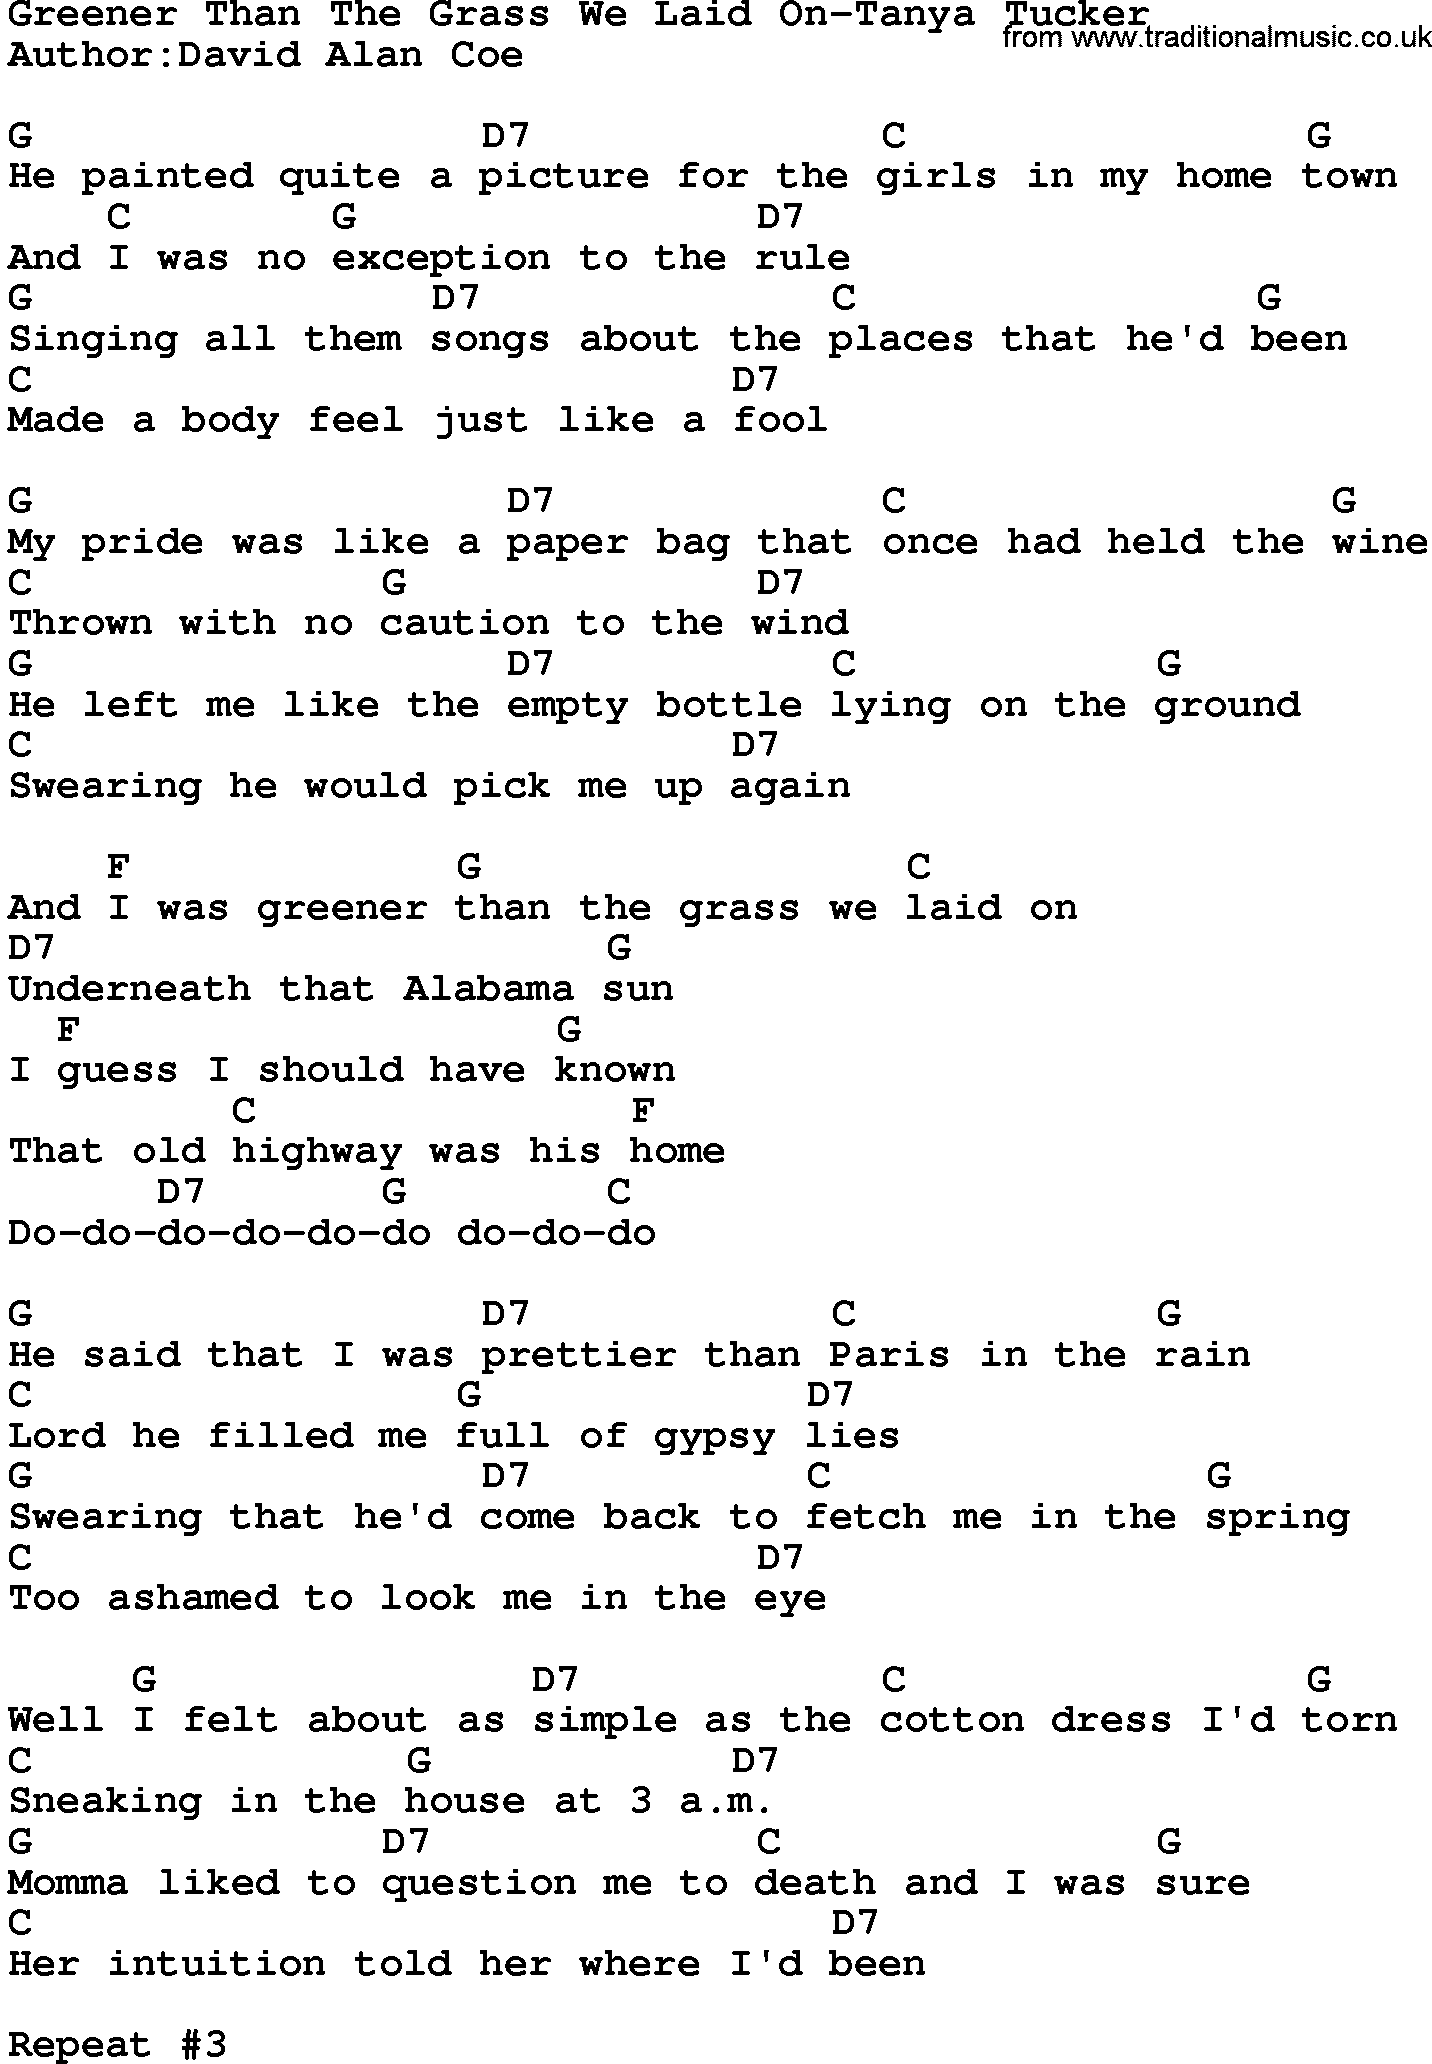 Country music song: Greener Than The Grass We Laid On-Tanya Tucker lyrics and chords